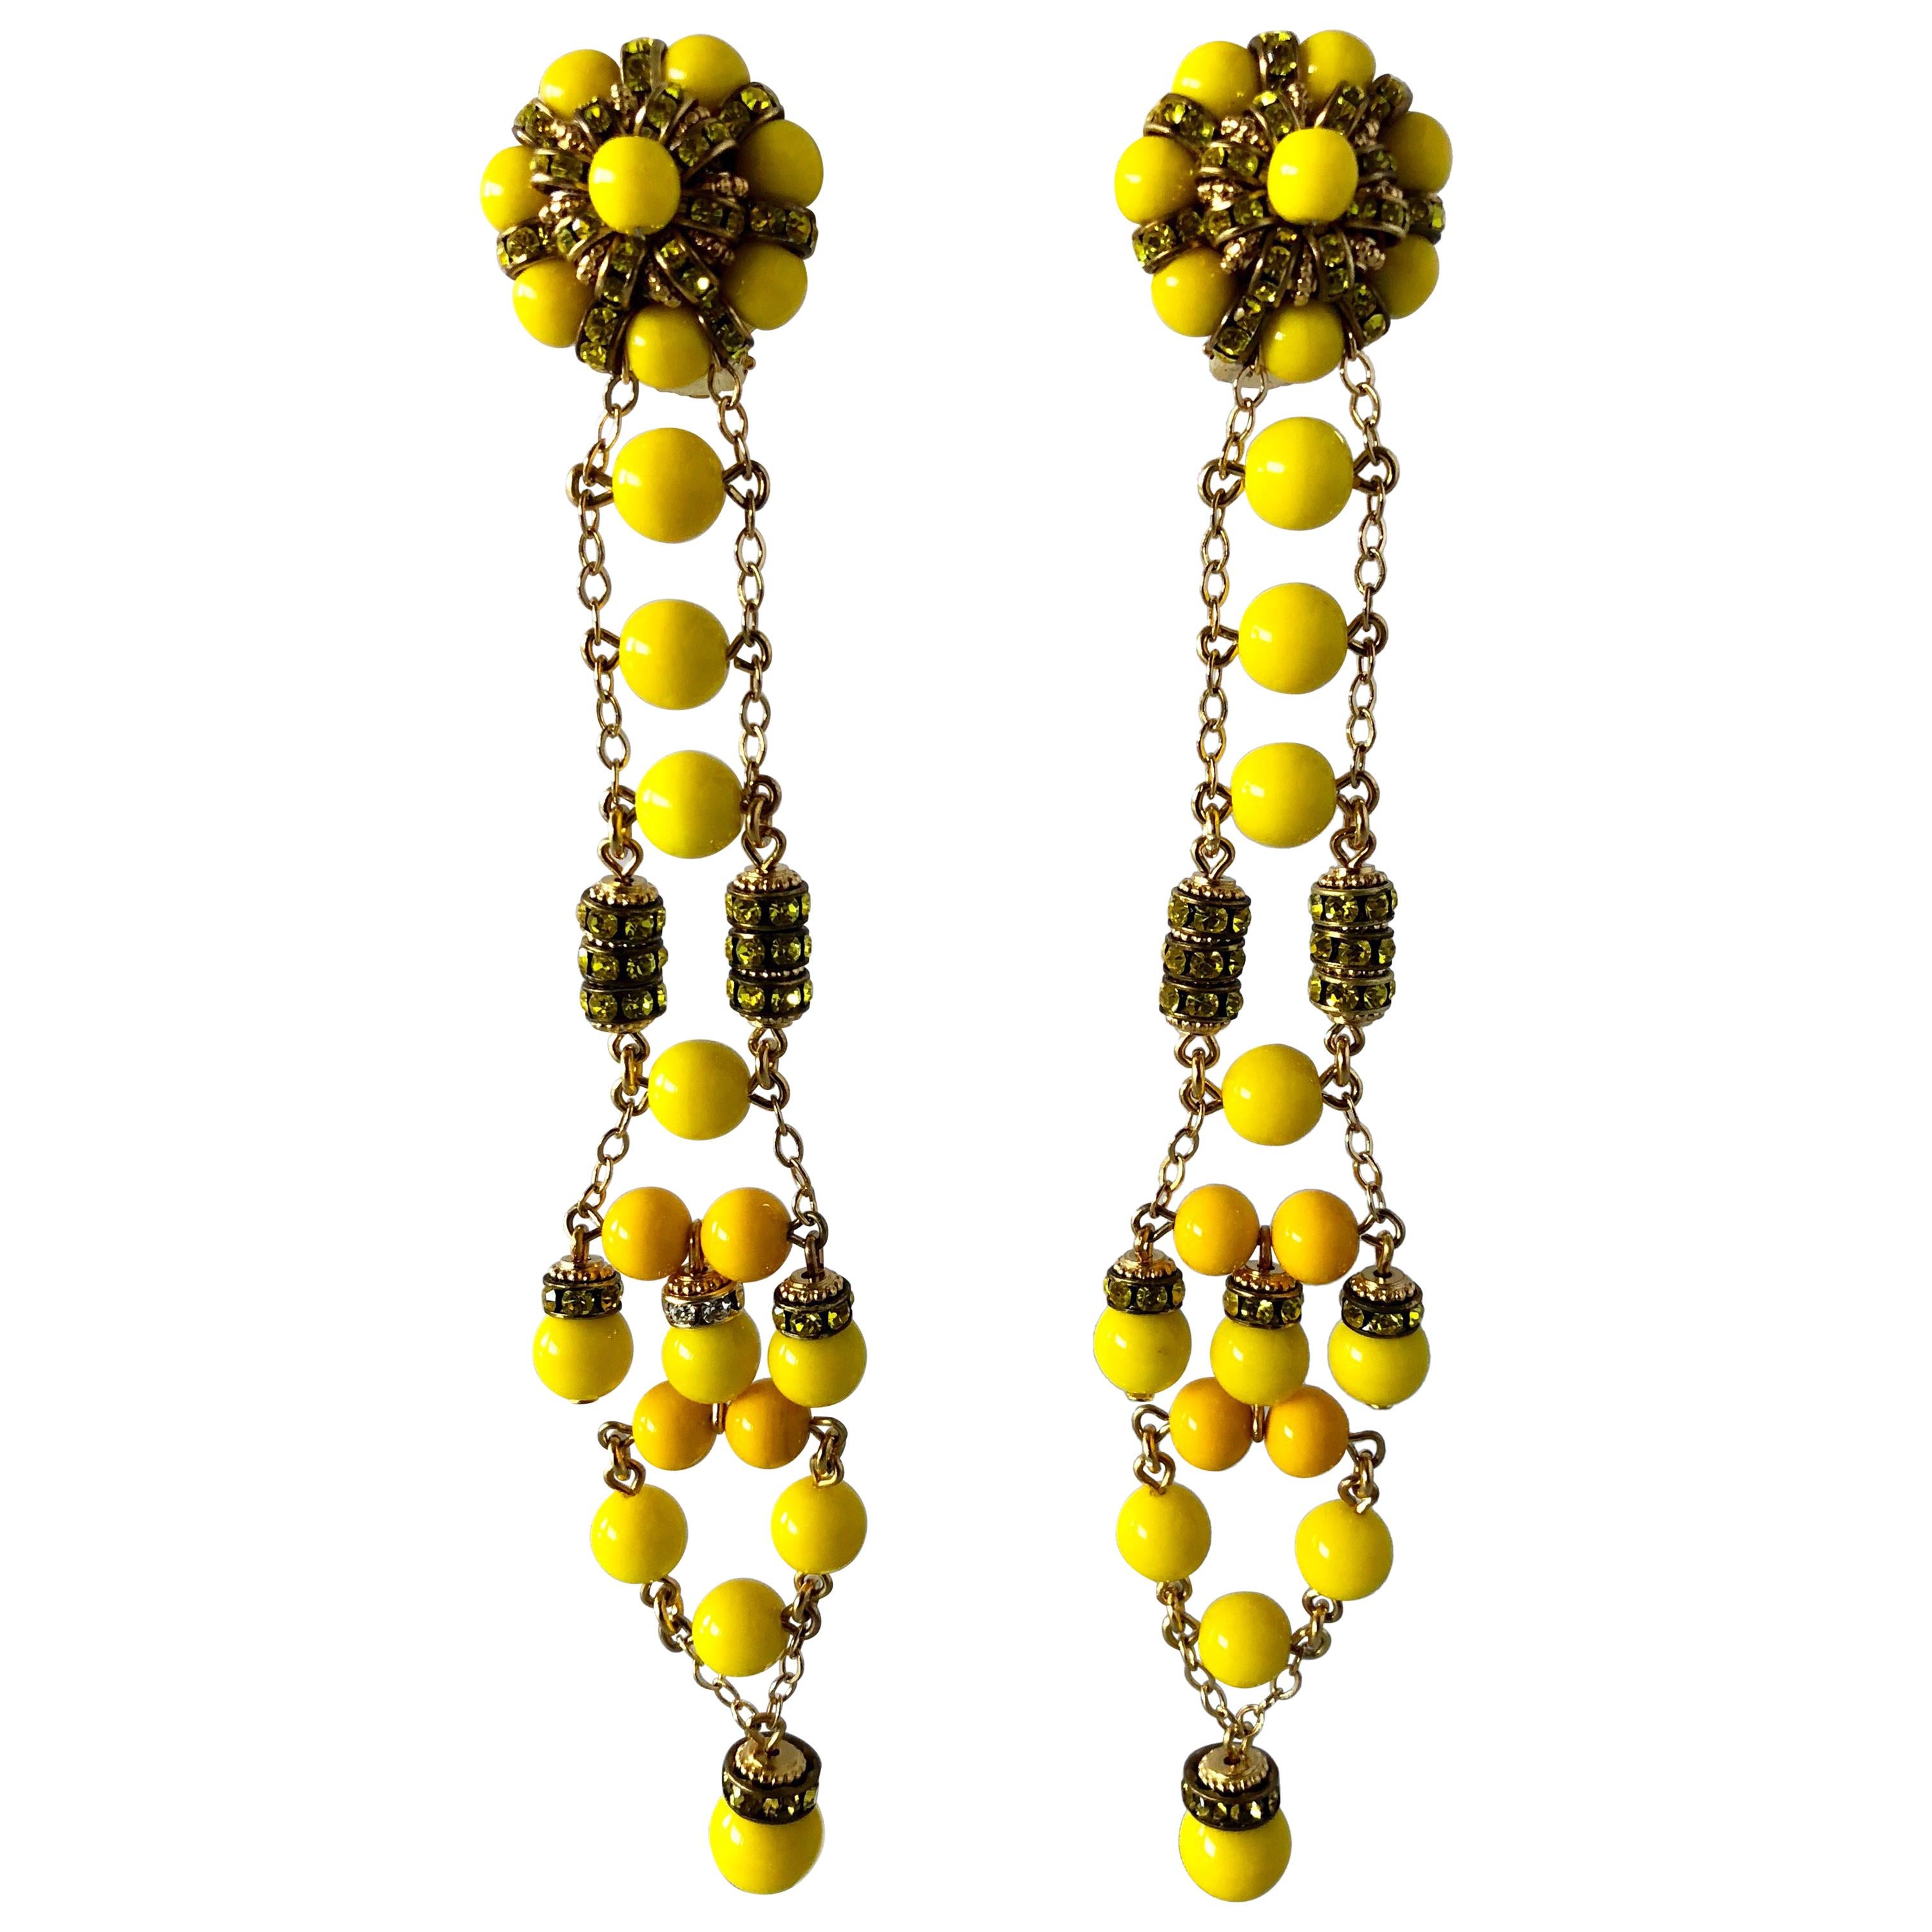 Dramatic French Yellow Shoulder Duster Statement Earrings 